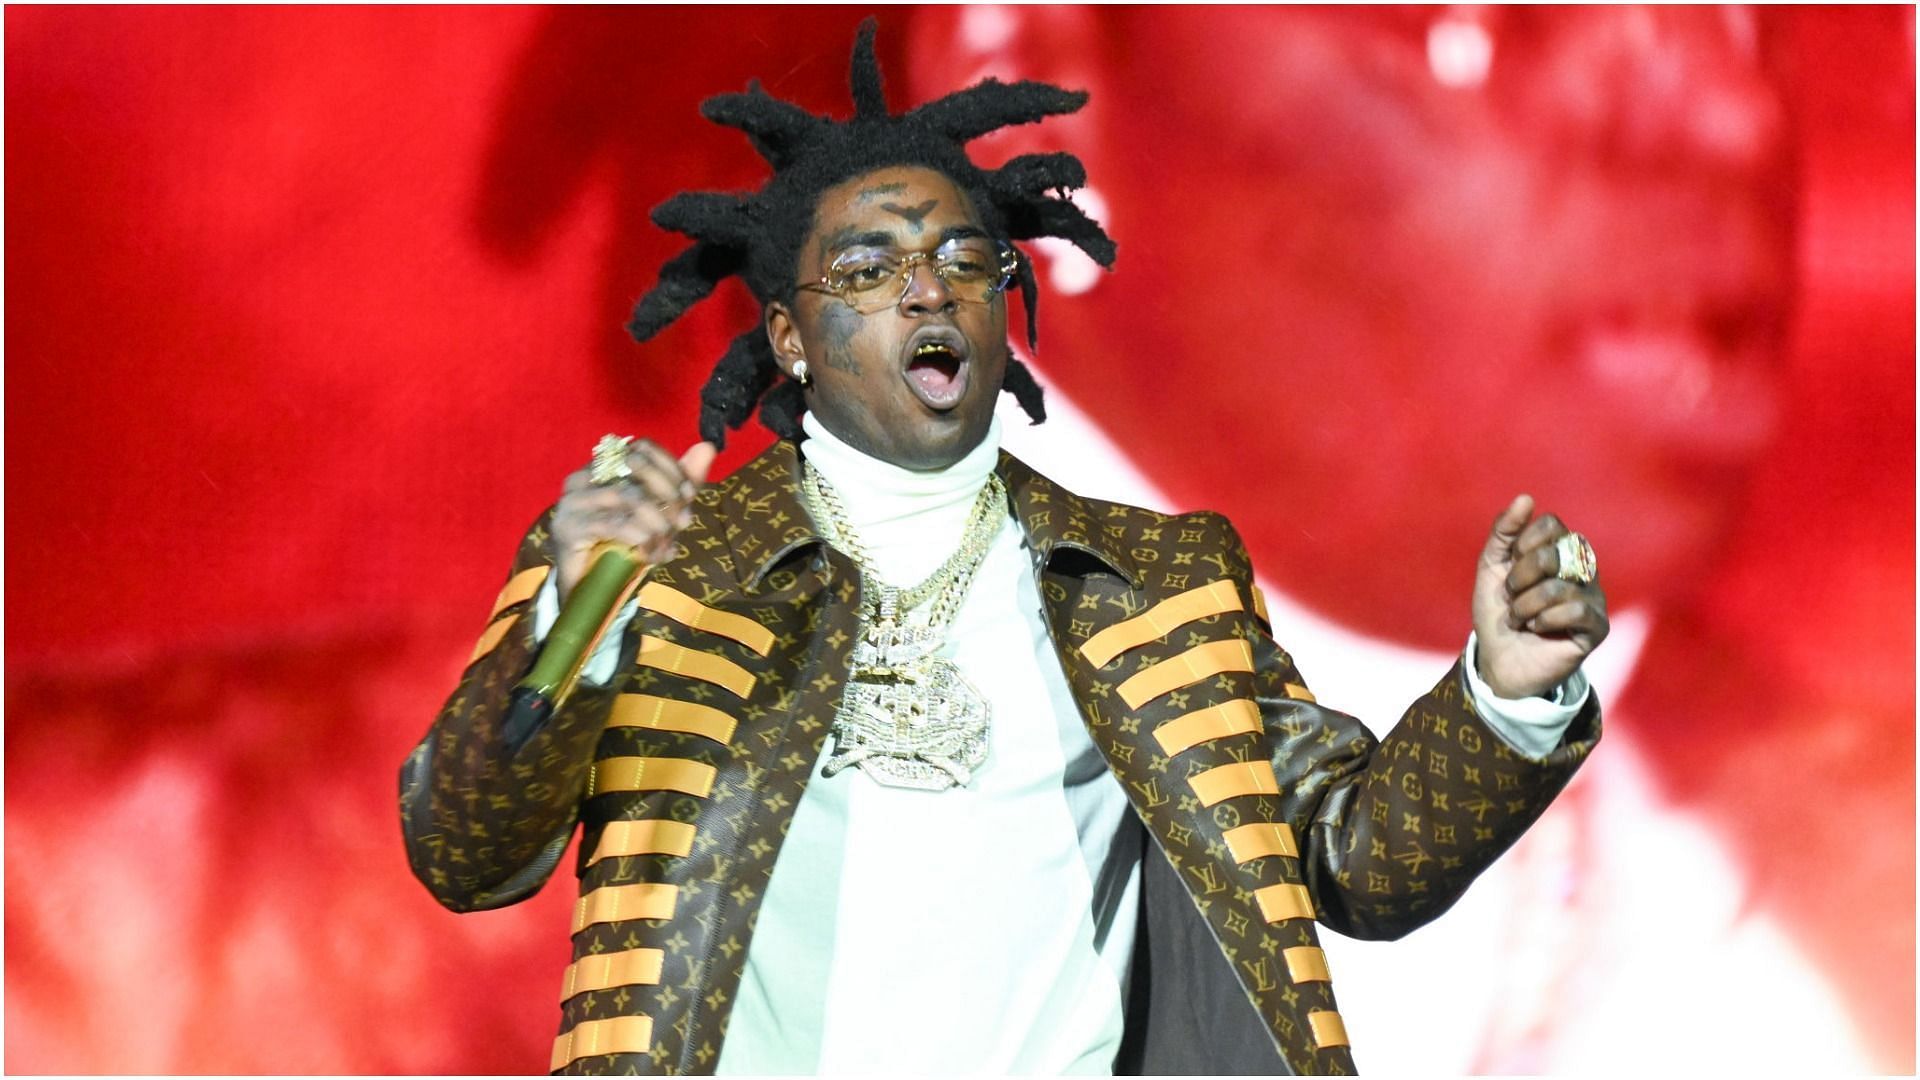 Kodak Black performs at the Rolling Loud NYC music festival in Citi Field (Image by Astrida Valigorsky via Getty Images)